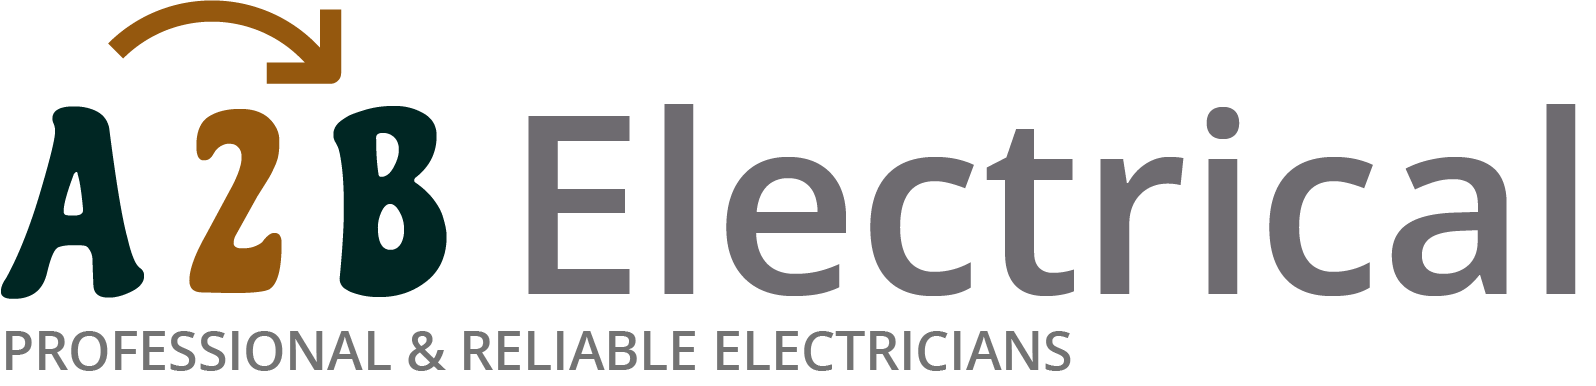 If you have electrical wiring problems in Welwyn, we can provide an electrician to have a look for you. 